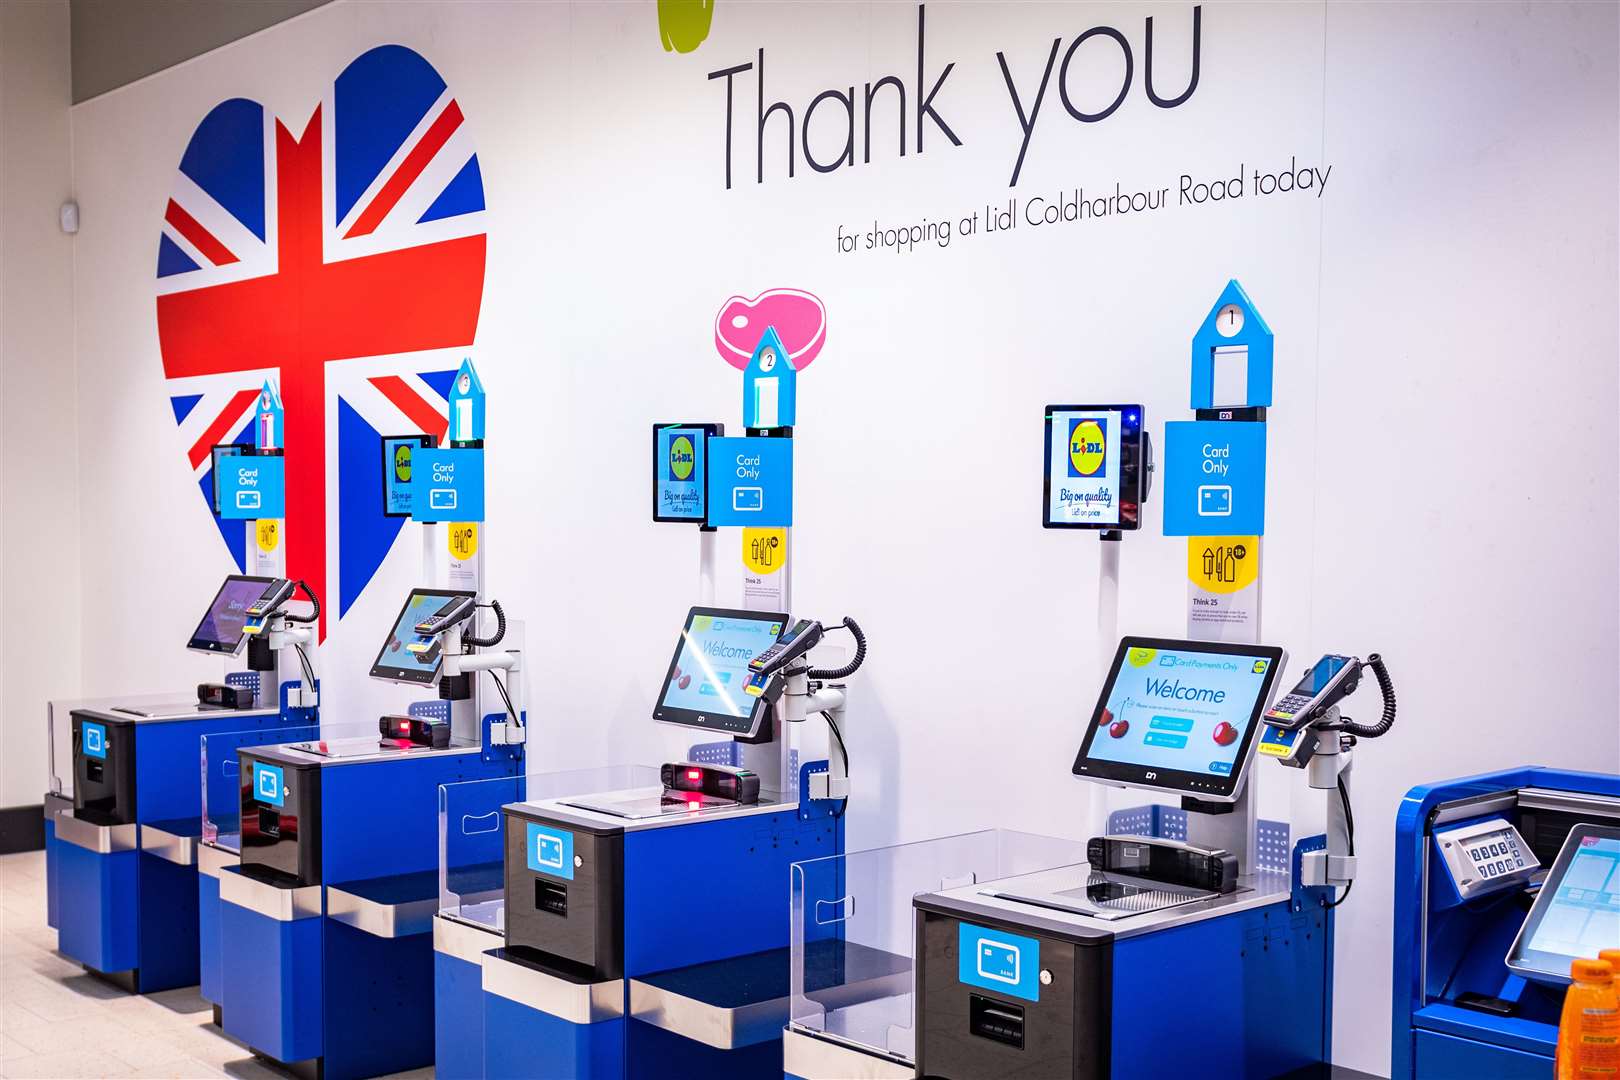 The store has some self-service tills. Picture: Lidl / CPG Photography